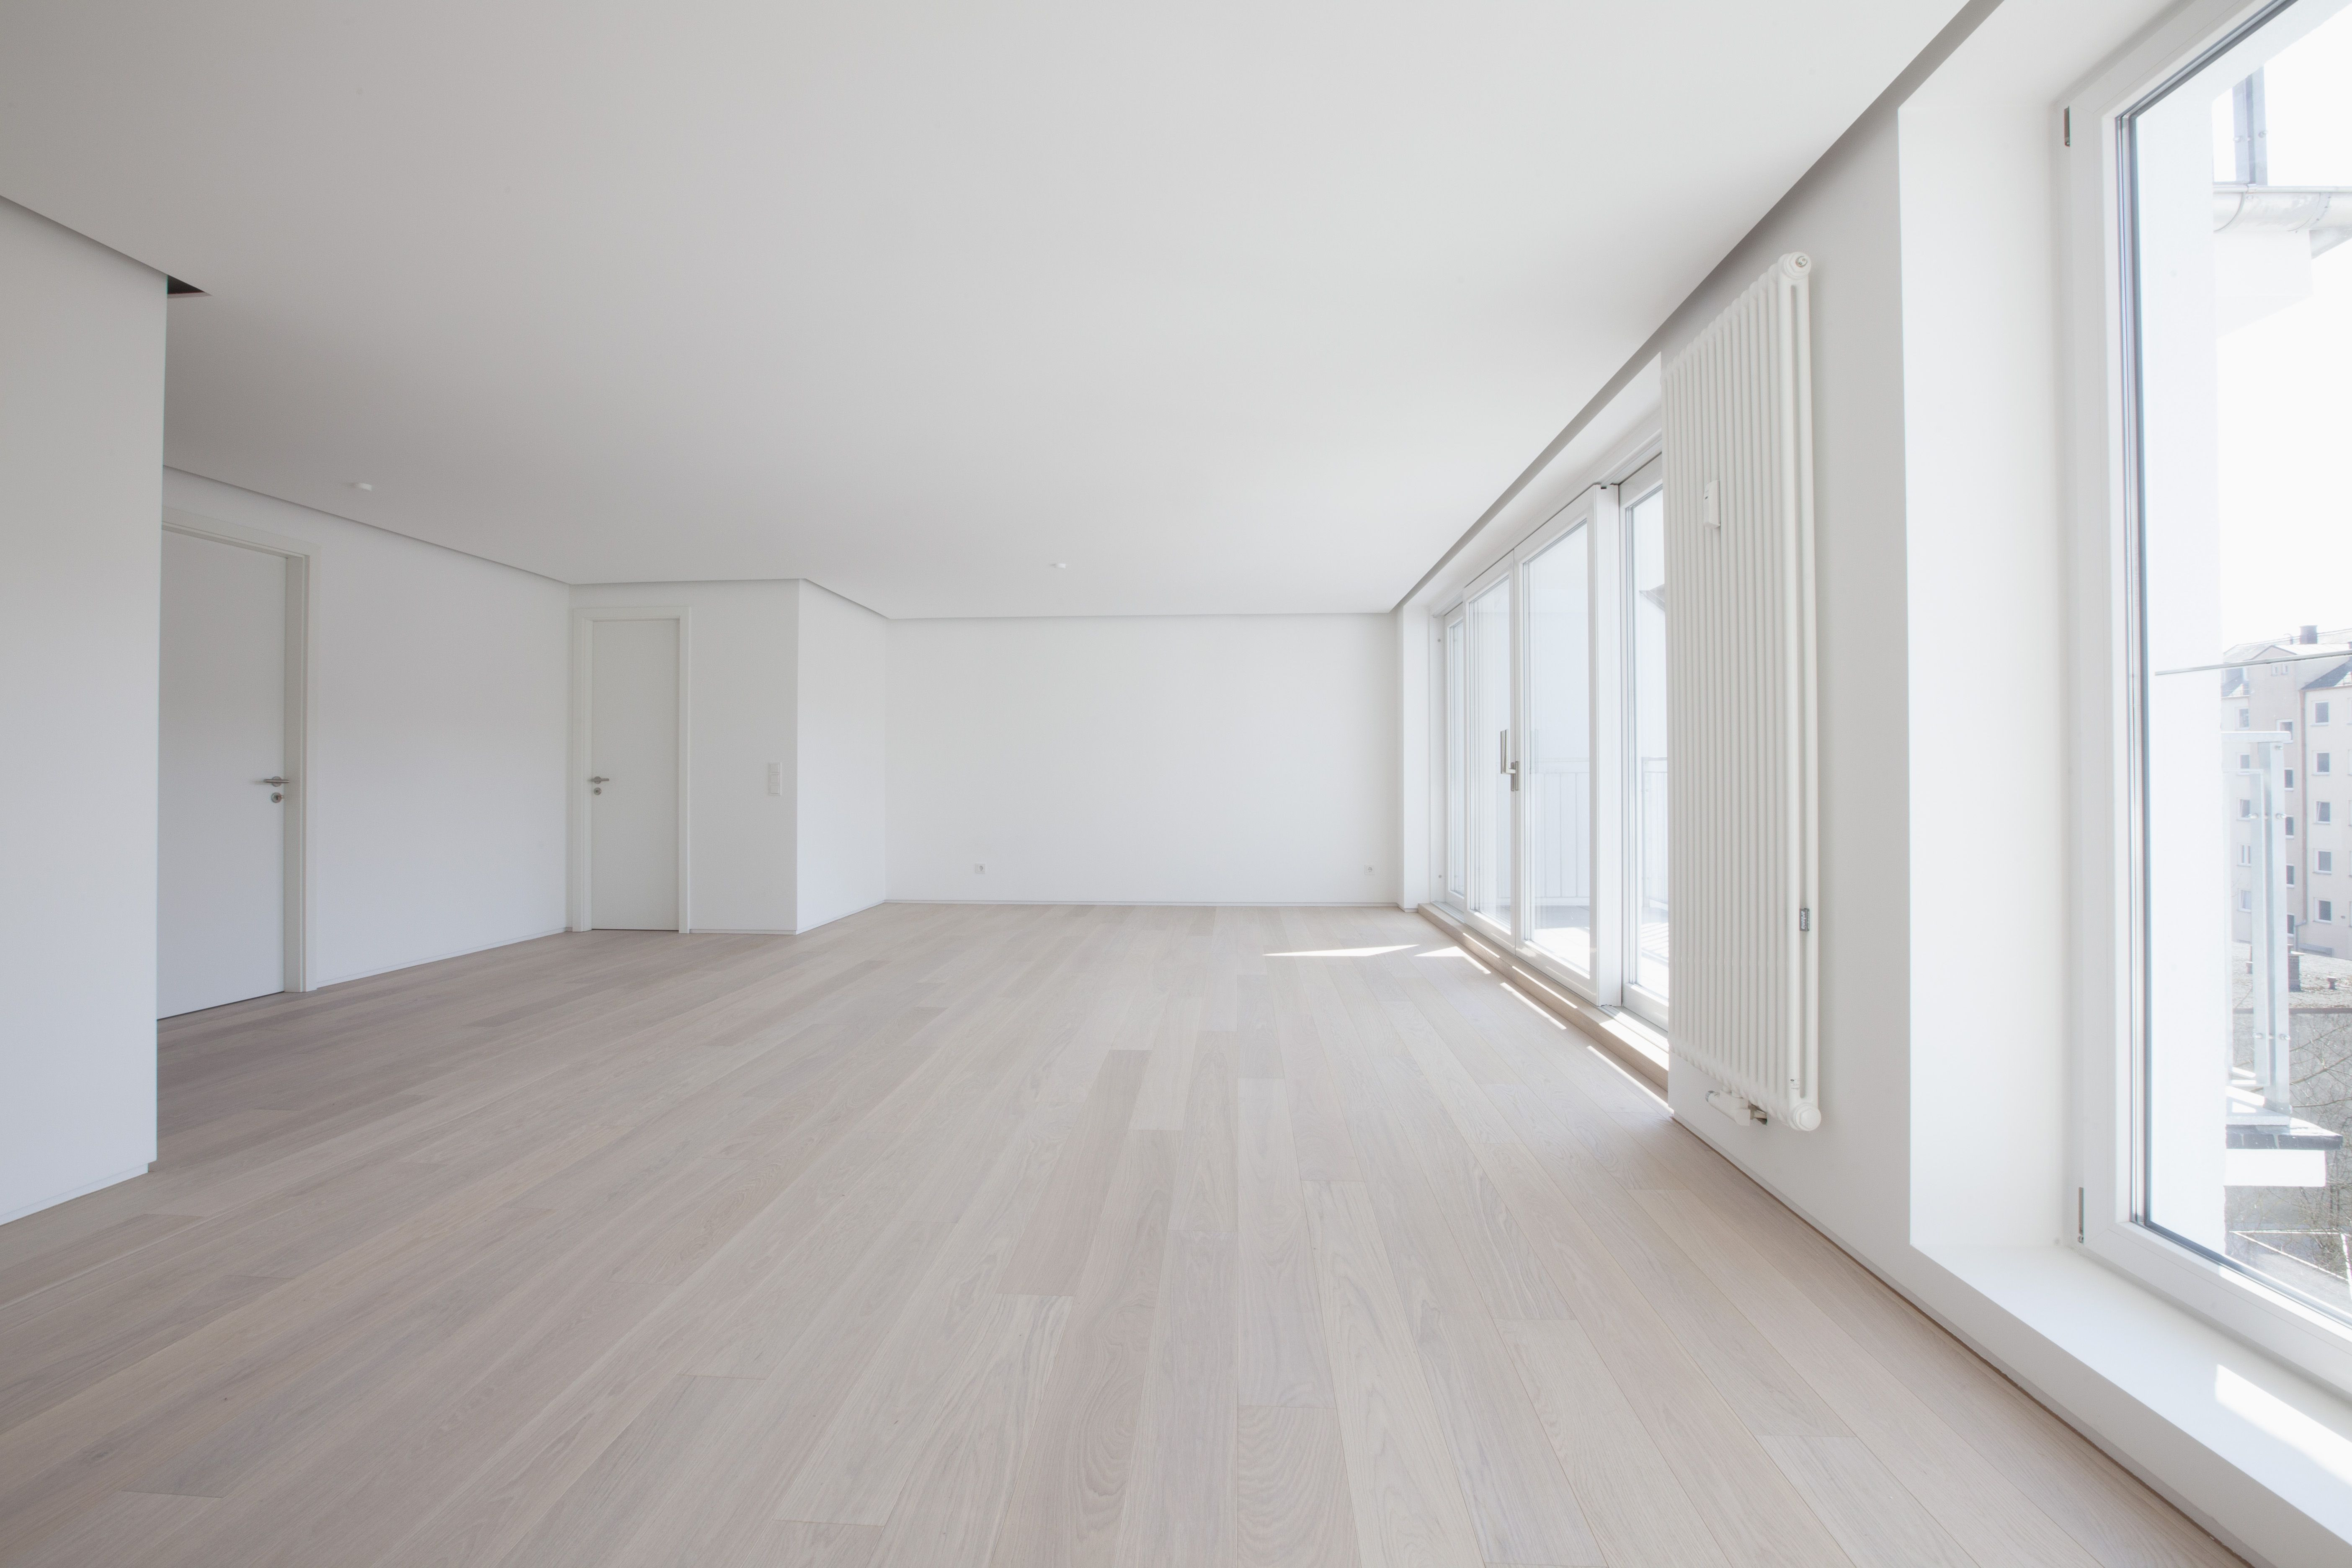 28 Ideal Hardwood Floor Refinishing Memphis 2024 free download hardwood floor refinishing memphis of basics of favorite hybrid engineered wood floors within empty living room in modern apartment 578189139 58866f903df78c2ccdecab05